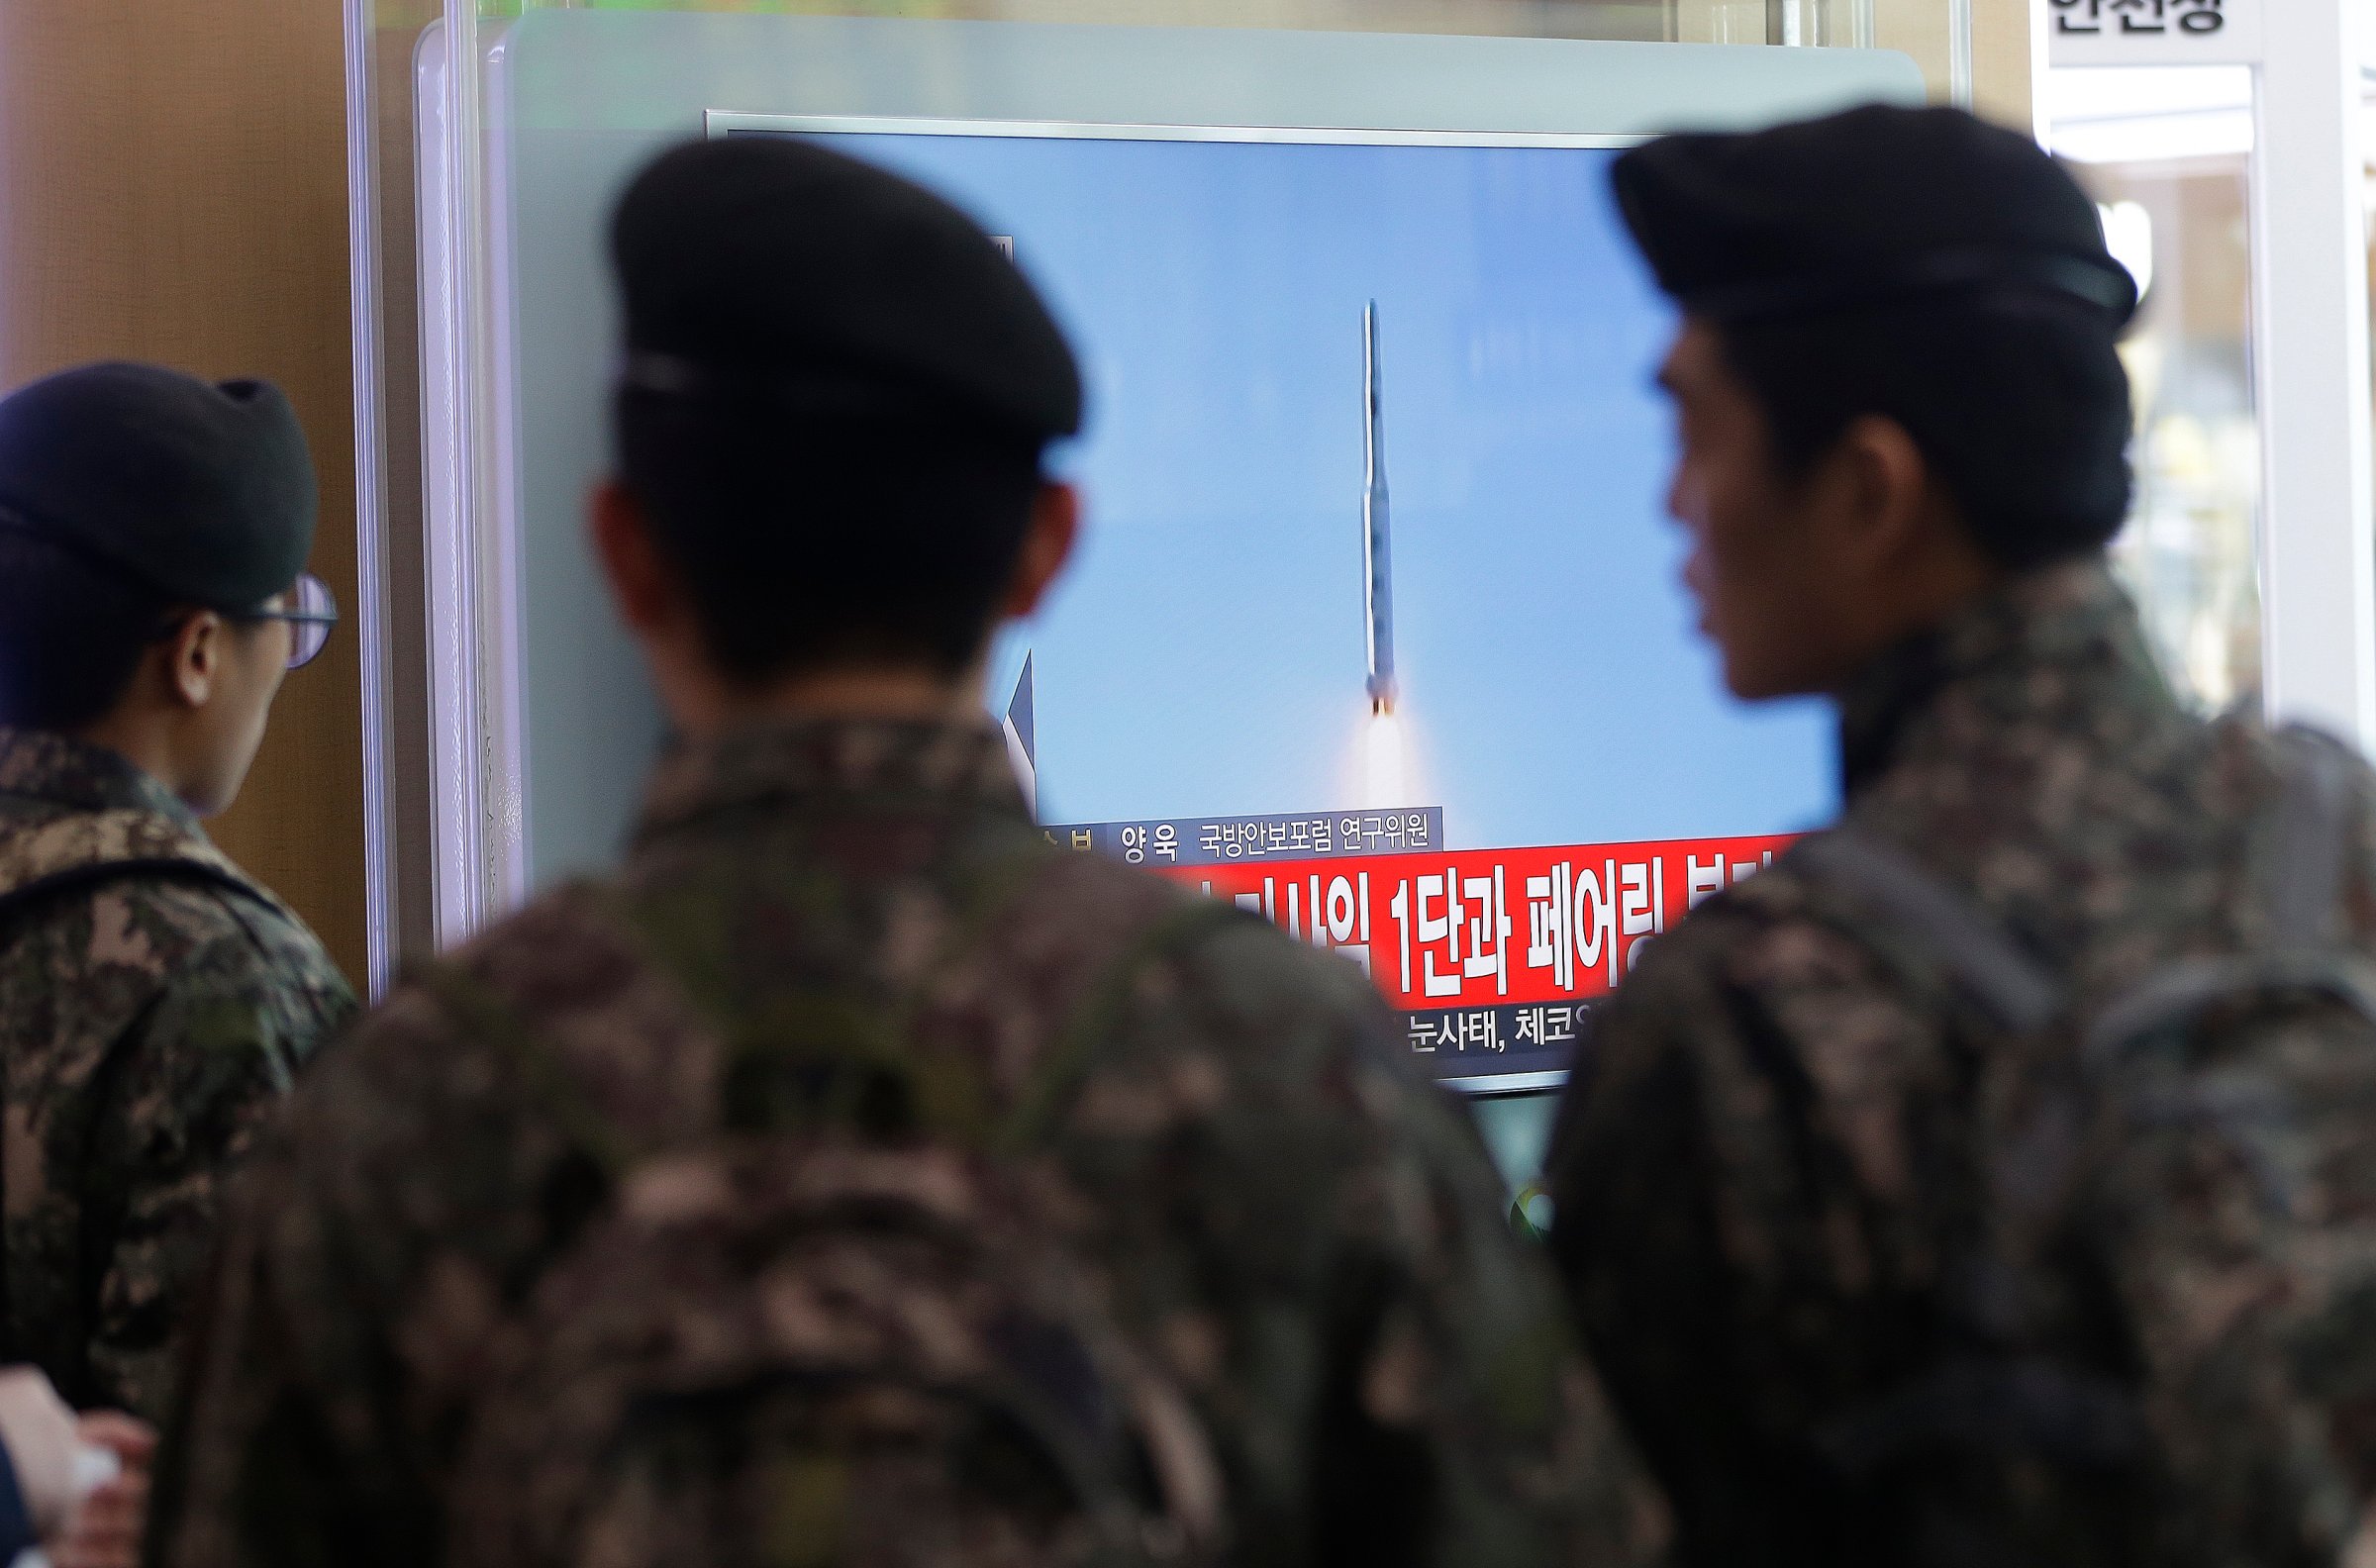 South Korean army soldiers watch a TV news program with a file footage about North Korea's rocket launch at Seoul Railway Station in Seoul, South Korea on Feb. 7, 2016.